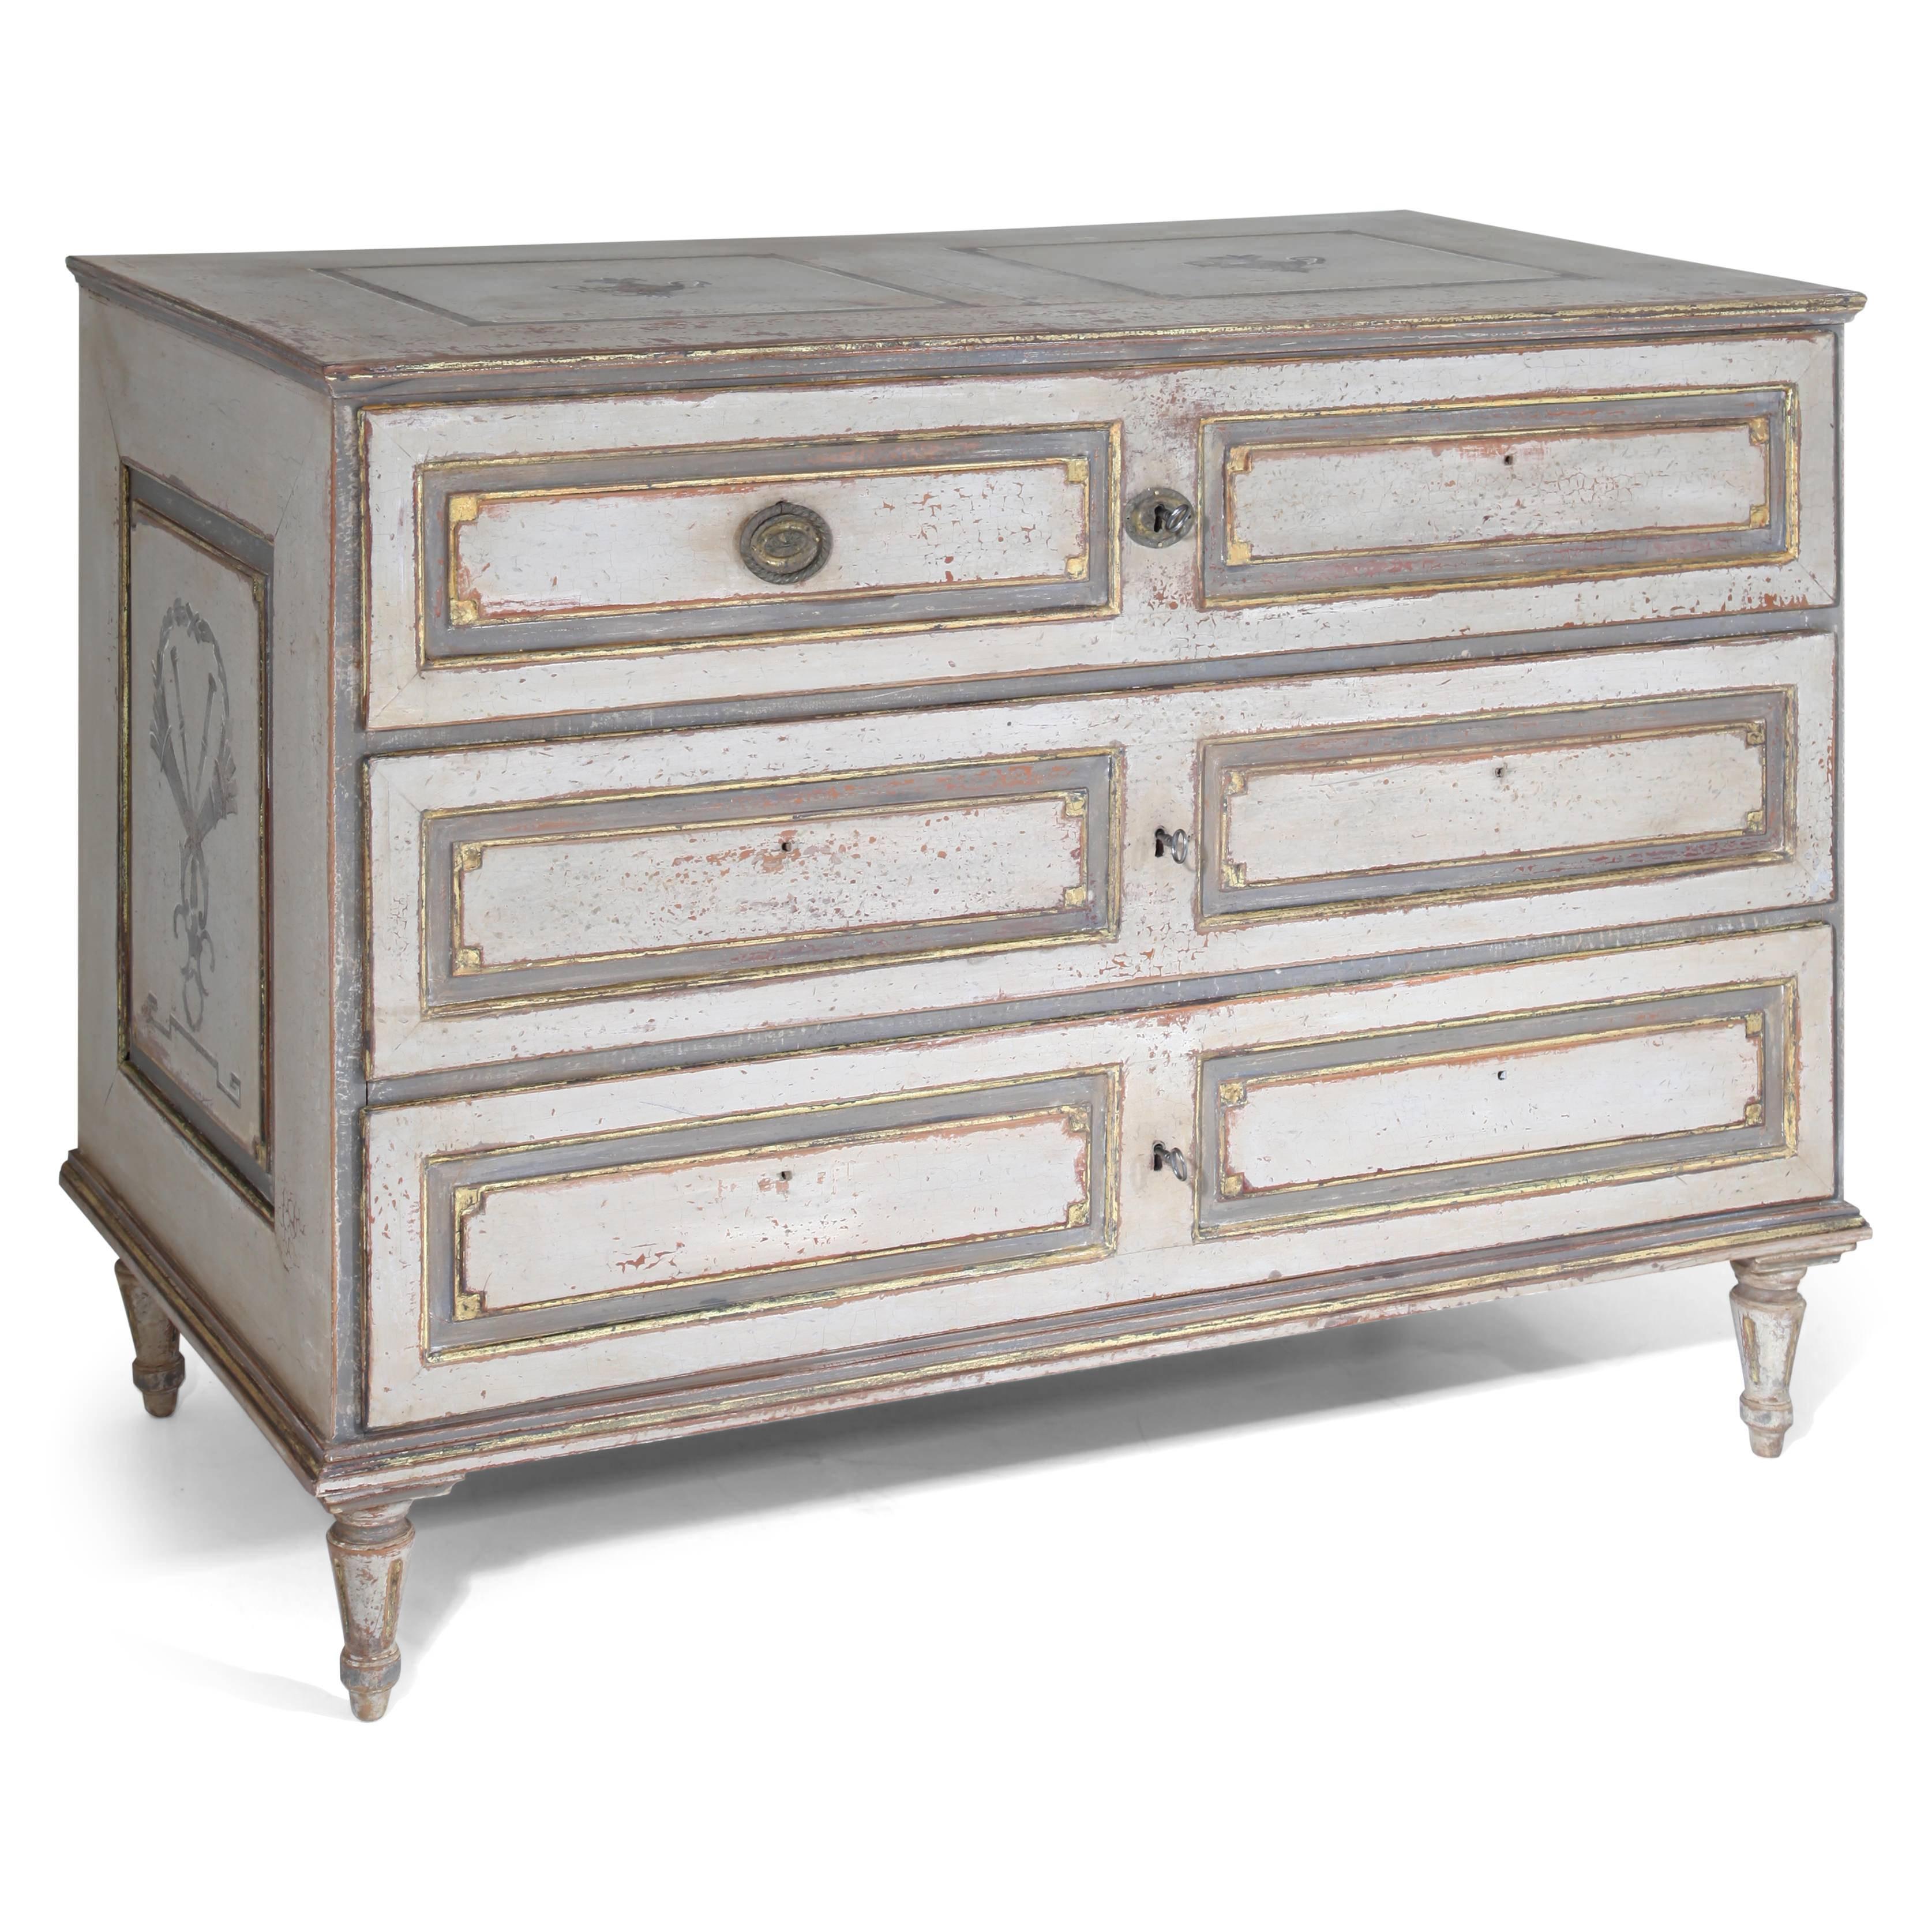 Three-drawered Louis Seize chest of drawers on conical fluted feet with fillings on the front and on the sides. The grey paint was redone and has an aged finish.